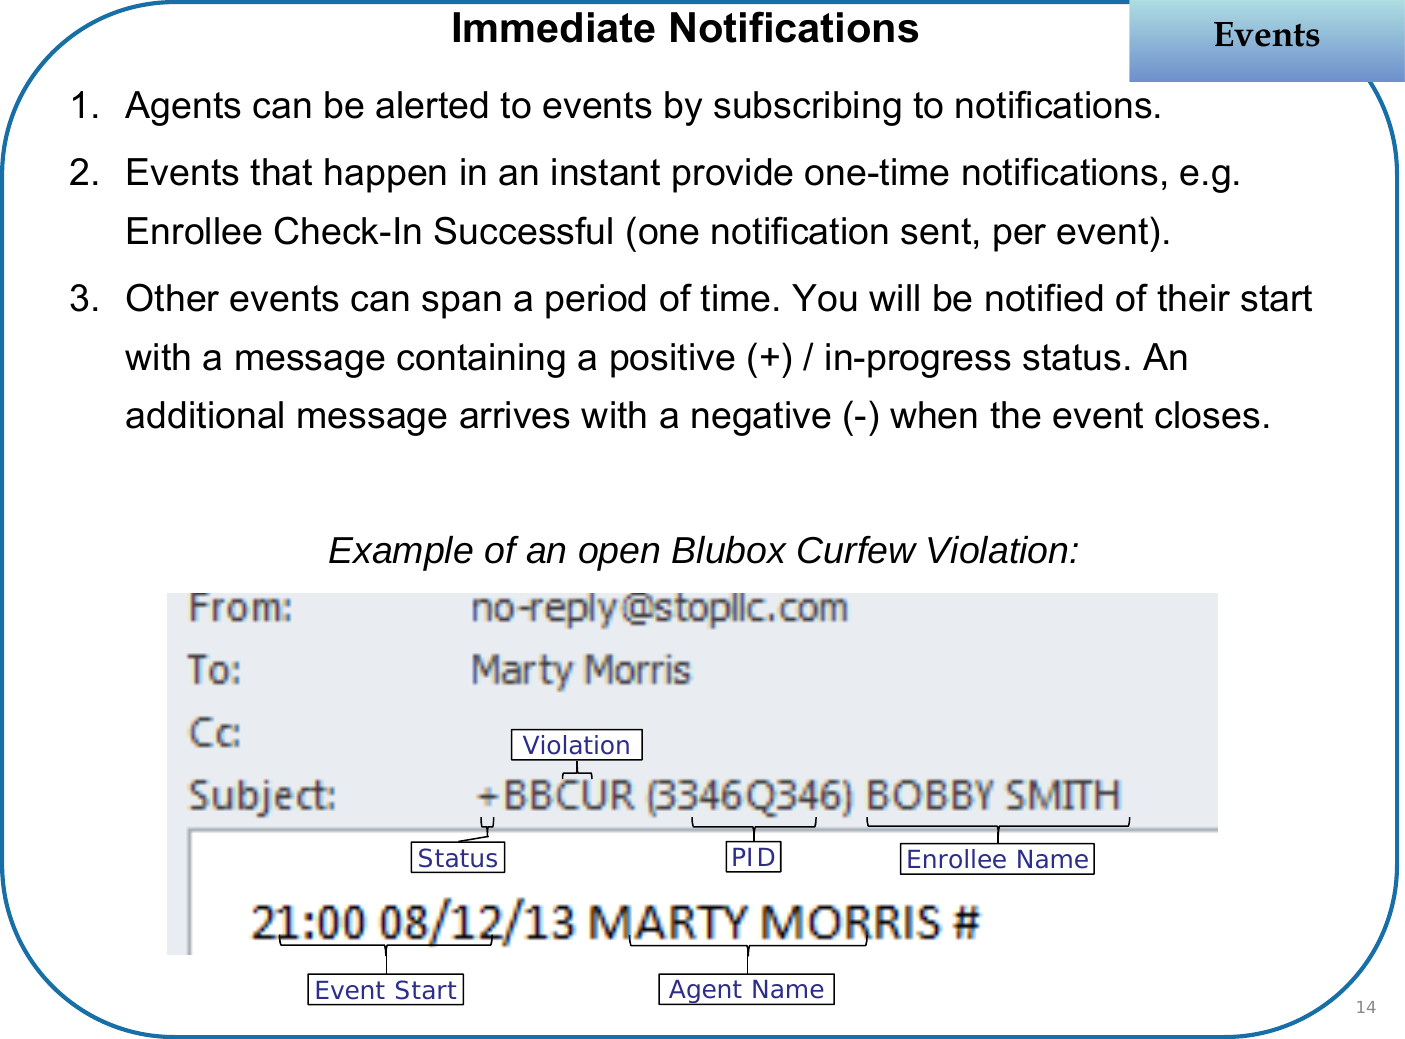 1. Agents can be alerted to events by subscribing to notifications.2. Events that happen in an instant provide one-time notifications, e.g. Enrollee Check-In Successful (one notification sent, per event).3. Other events can span a period of time. You will be notified of their start with a message containing a positive (+) / in-progress status. An additional message arrives with a negative (-) when the event closes. Example of an open Blubox Curfew Violation:EventsEventsPIDViolationEvent Start Agent NameEnrollee NameStatus14Immediate Notifications